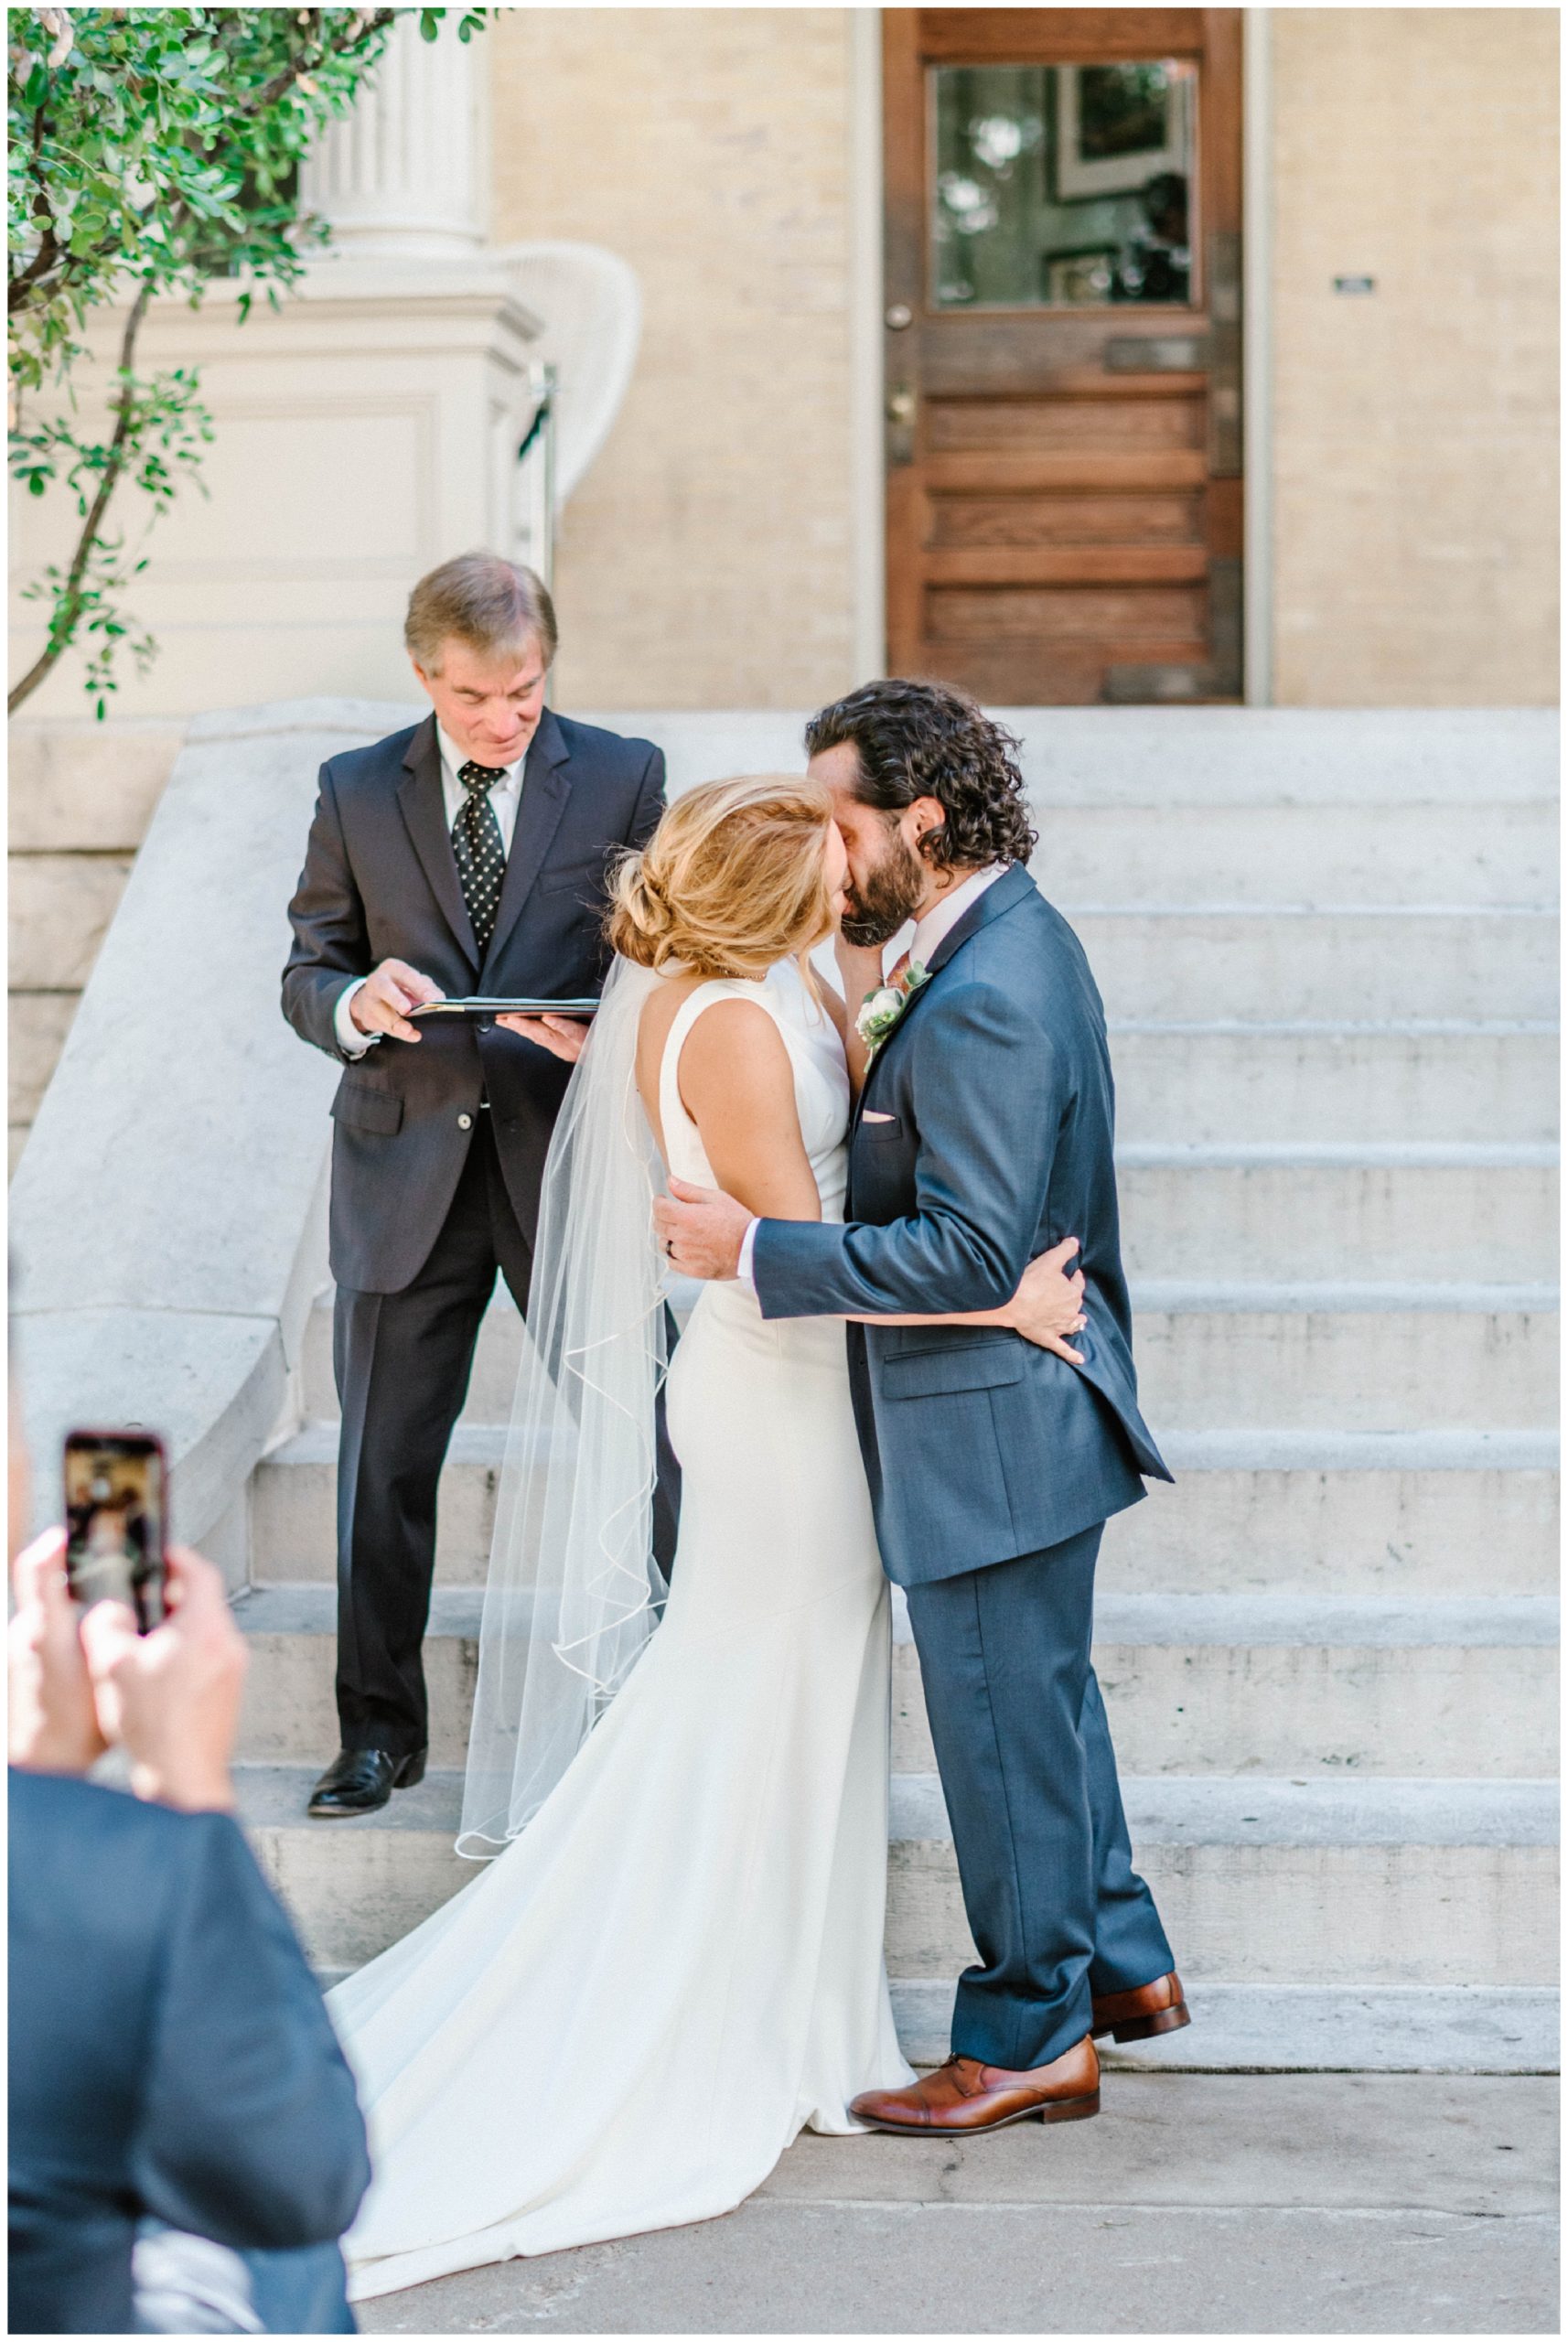 Emily and Ralph’s intimate wedding ceremony at Hotel Ella in Austin, Texas